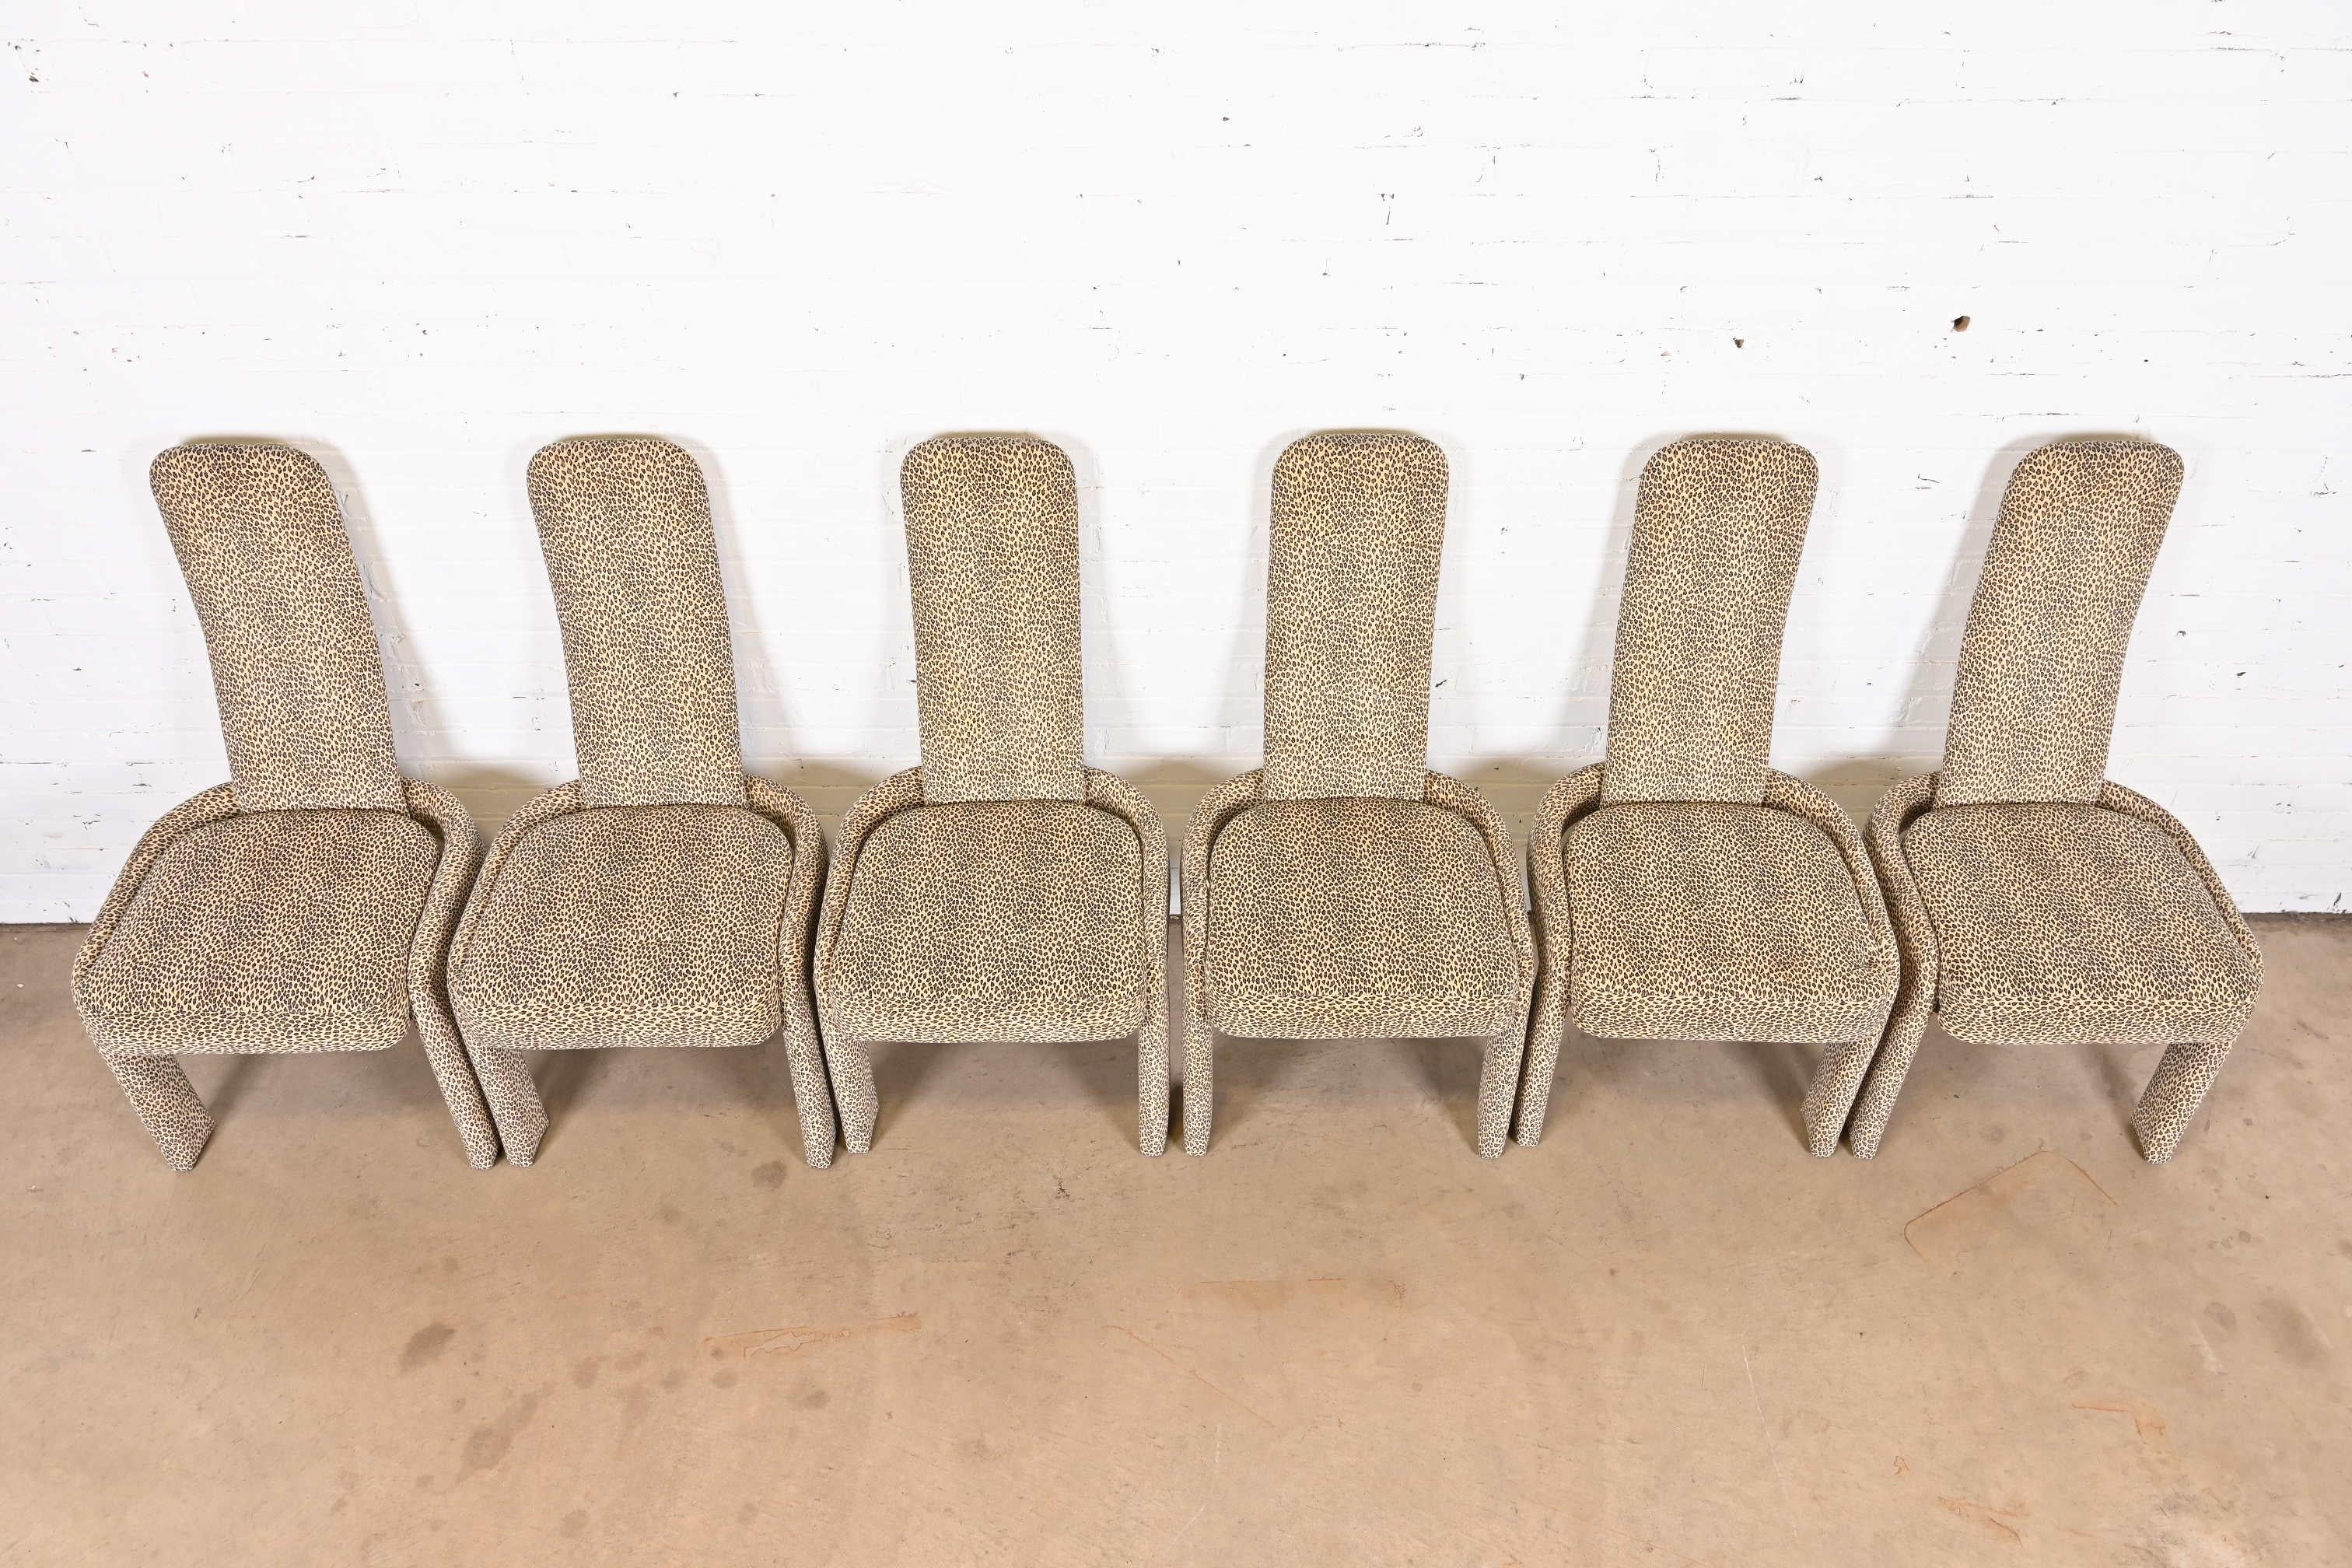 Late 20th Century Pierre Cardin Leopard Print Upholstered High Back Dining Chairs, Set of Six For Sale